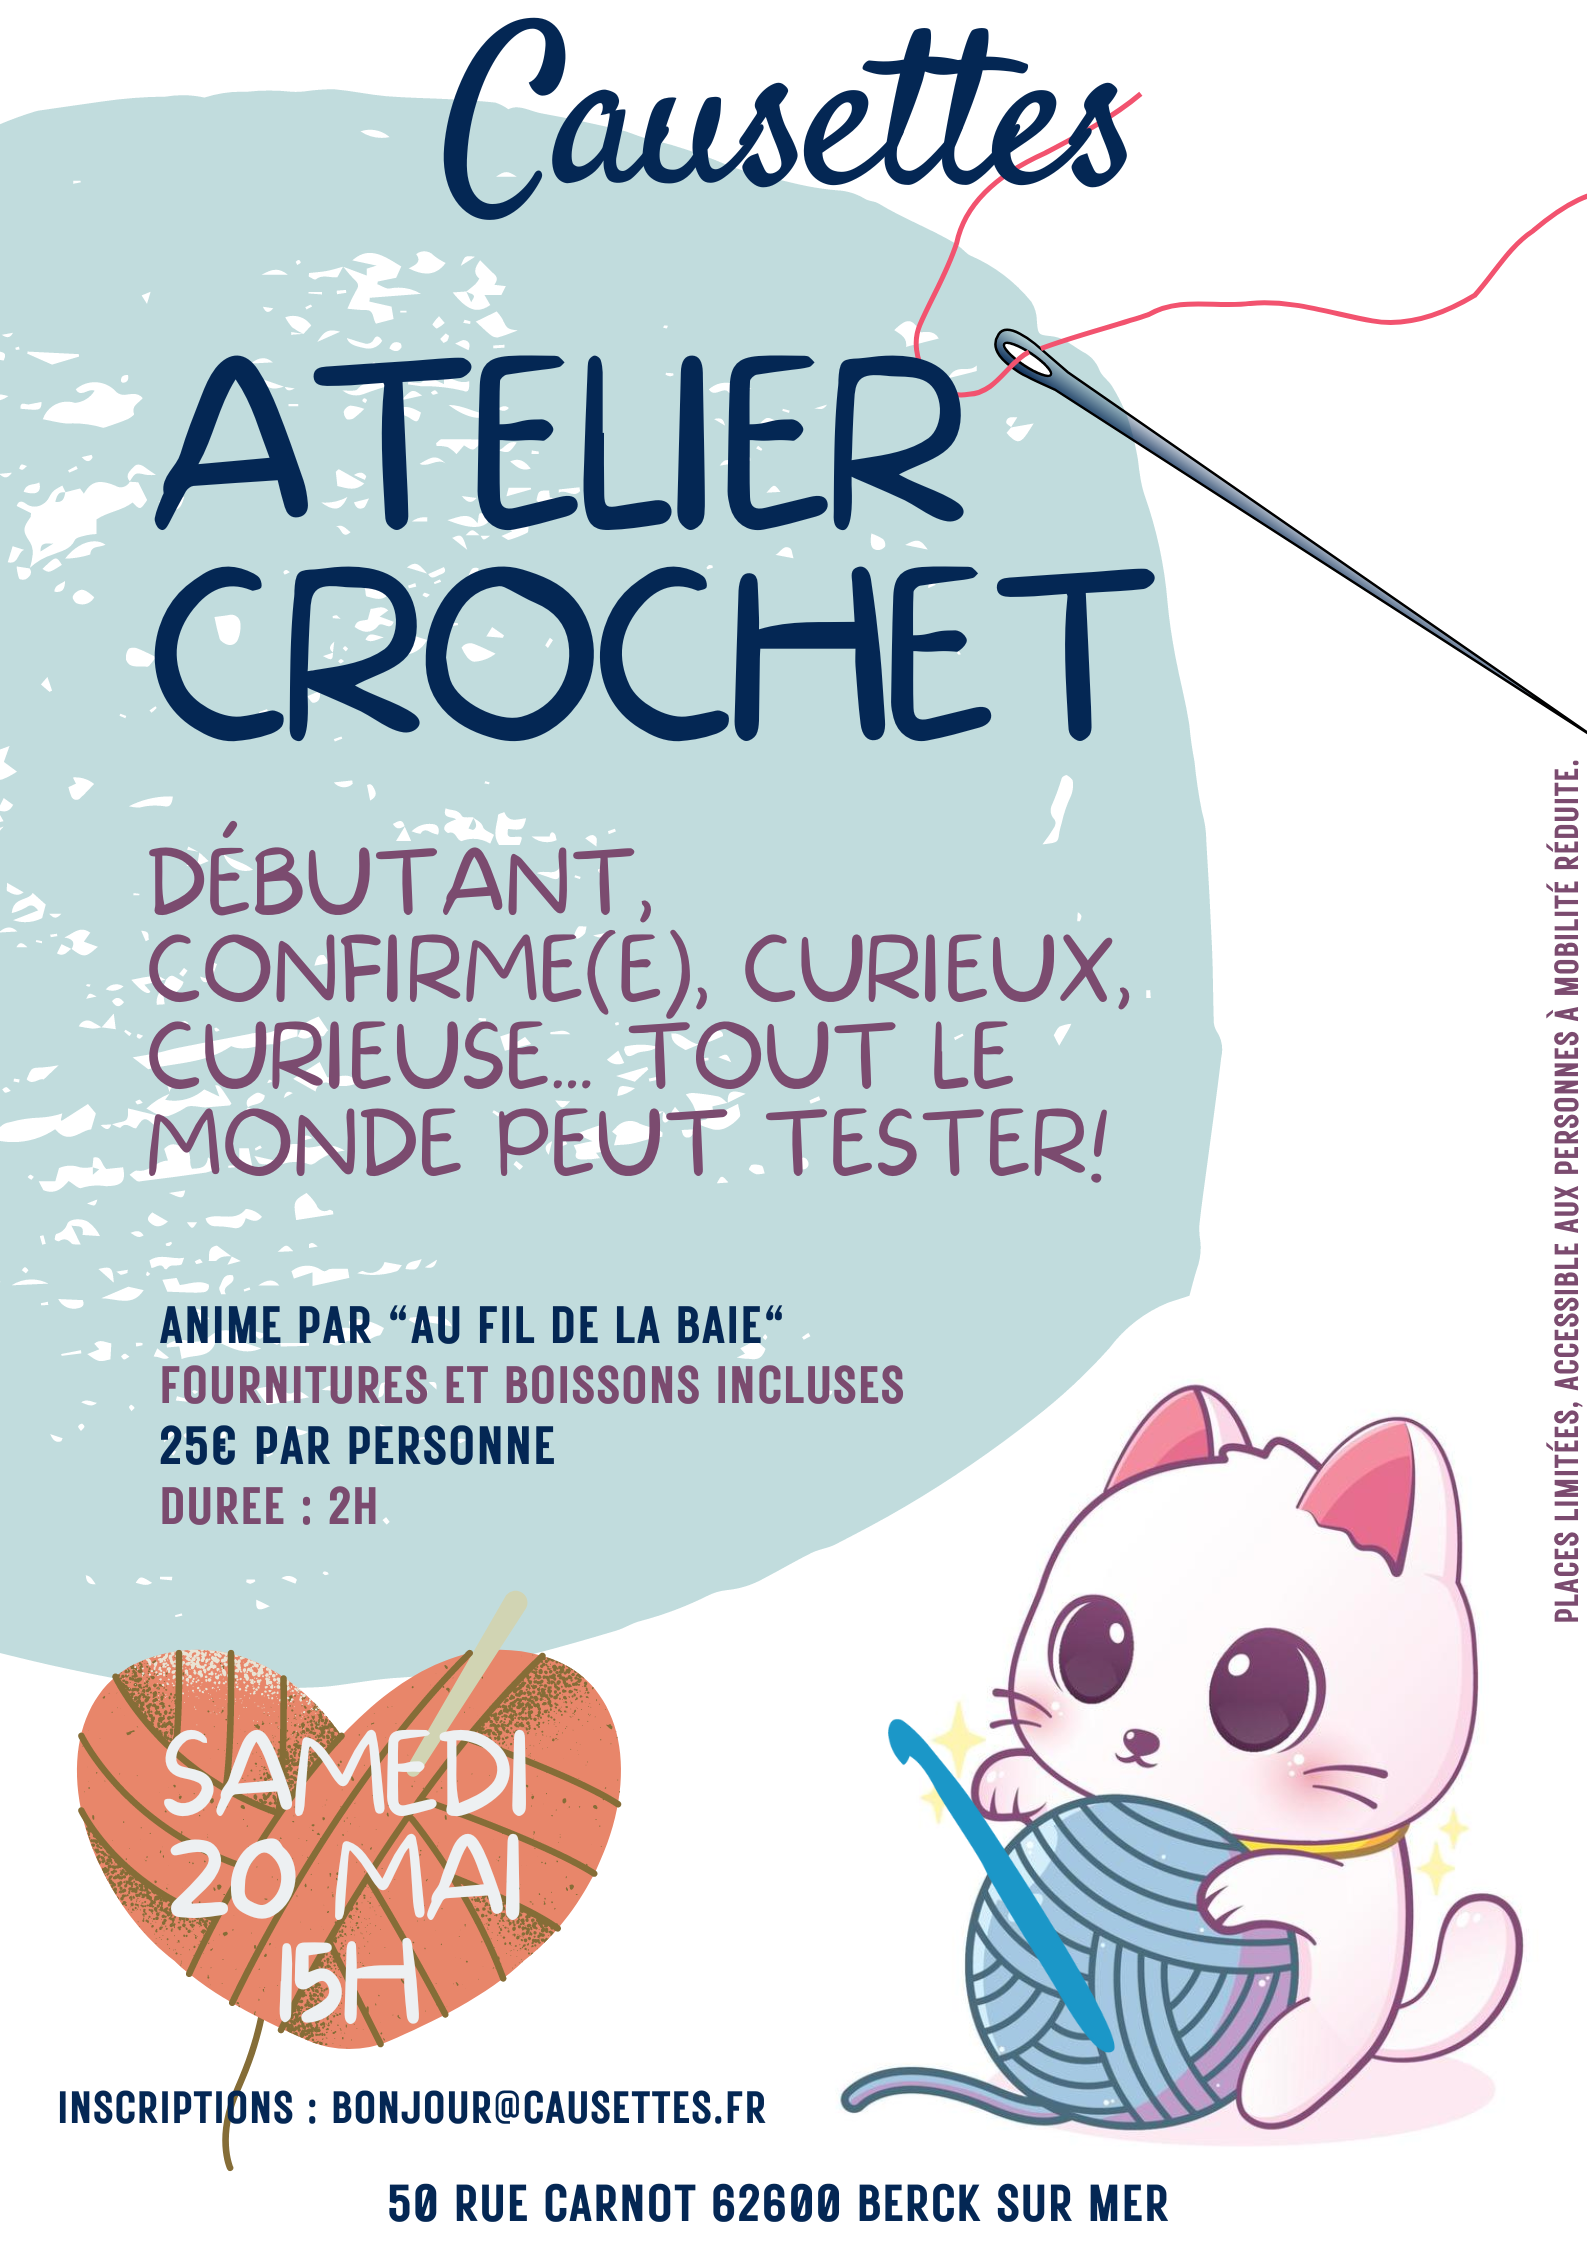 You are currently viewing Atelier Crochet le 20 mai